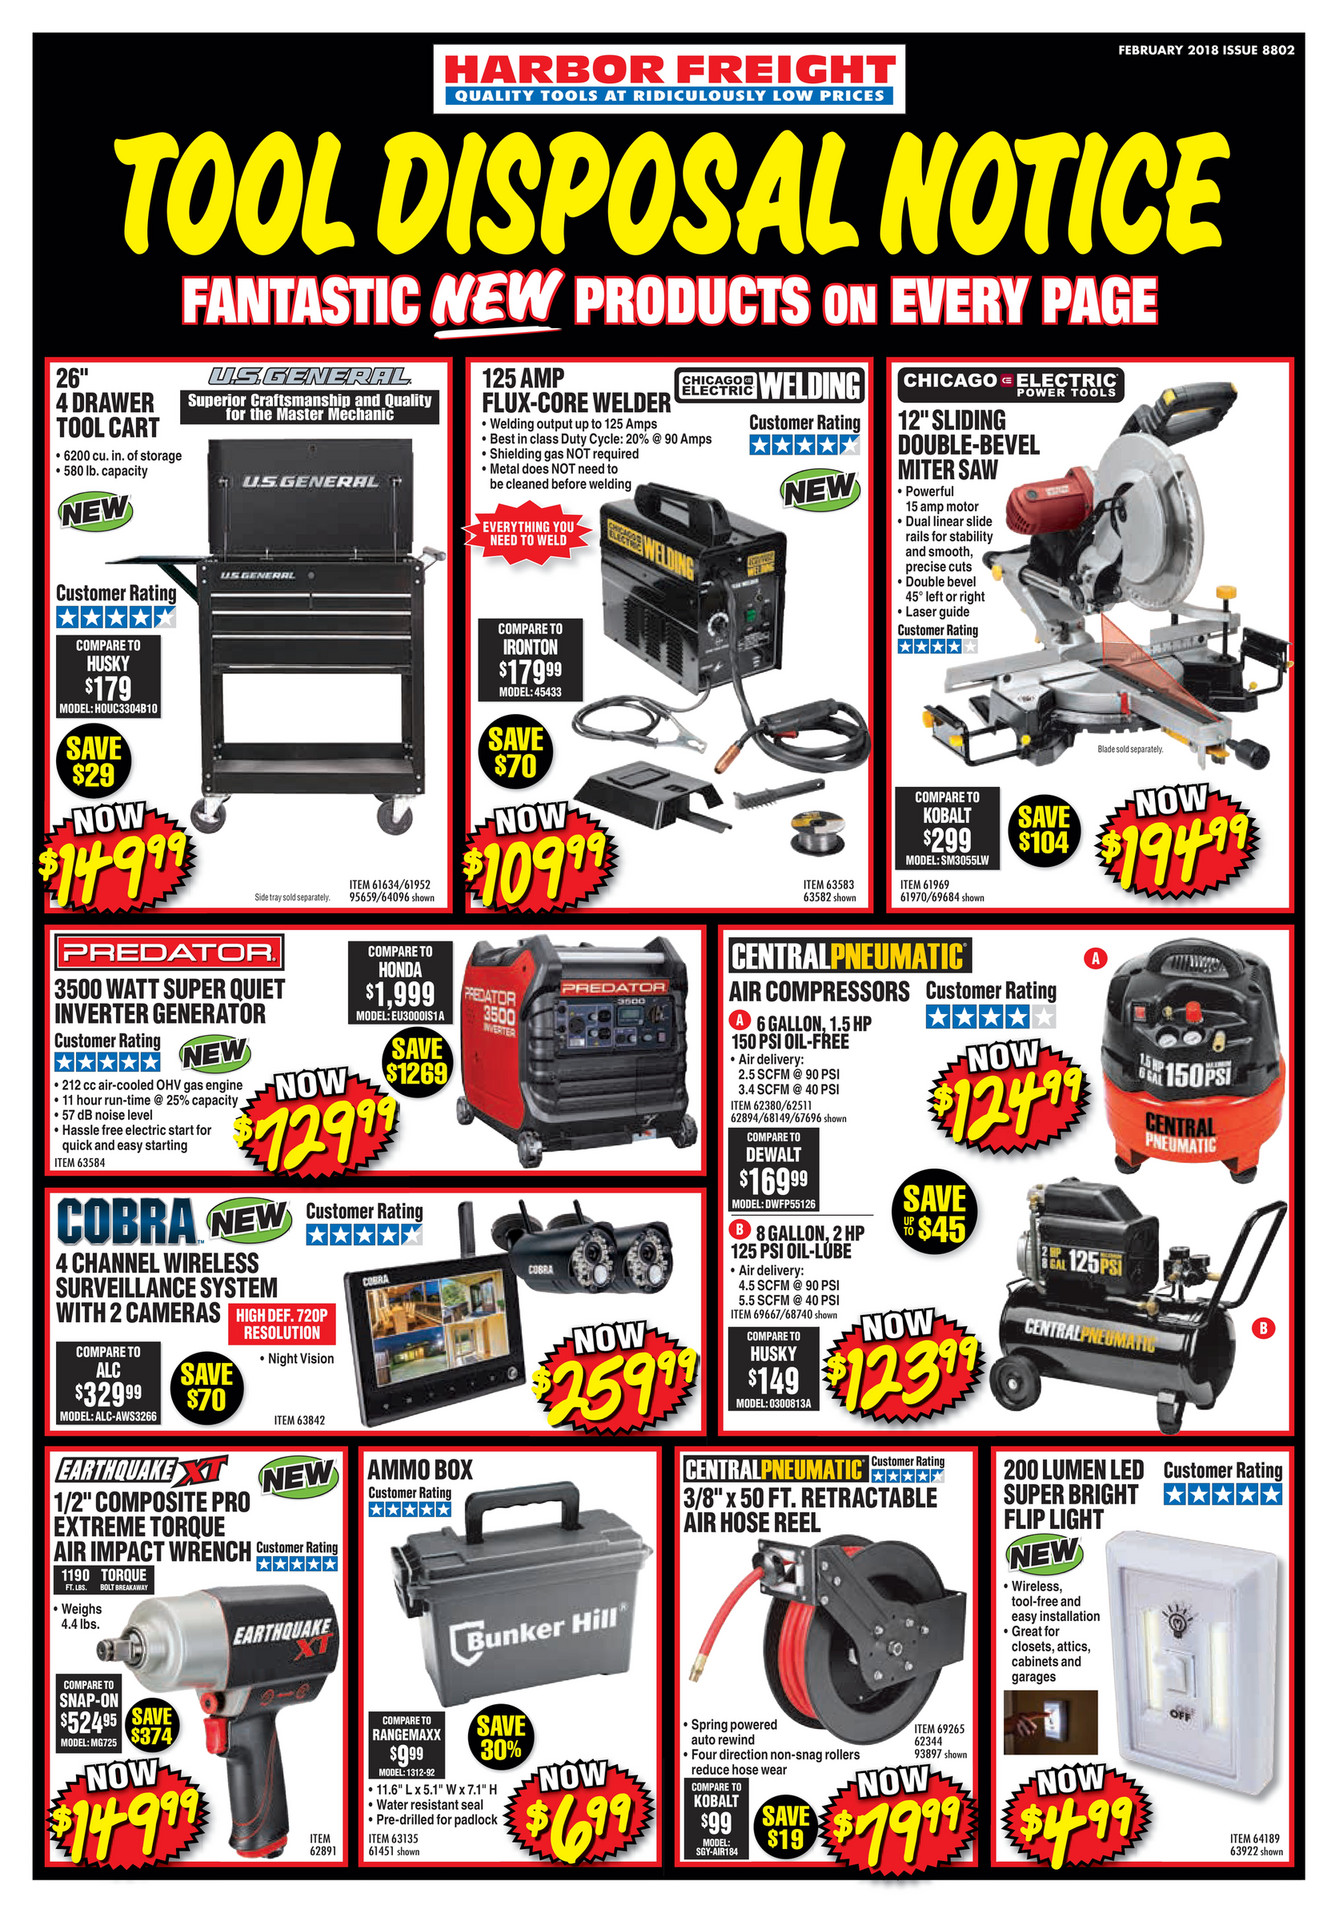 Harbor Freight Tools - February 2018 Ad - Page 1